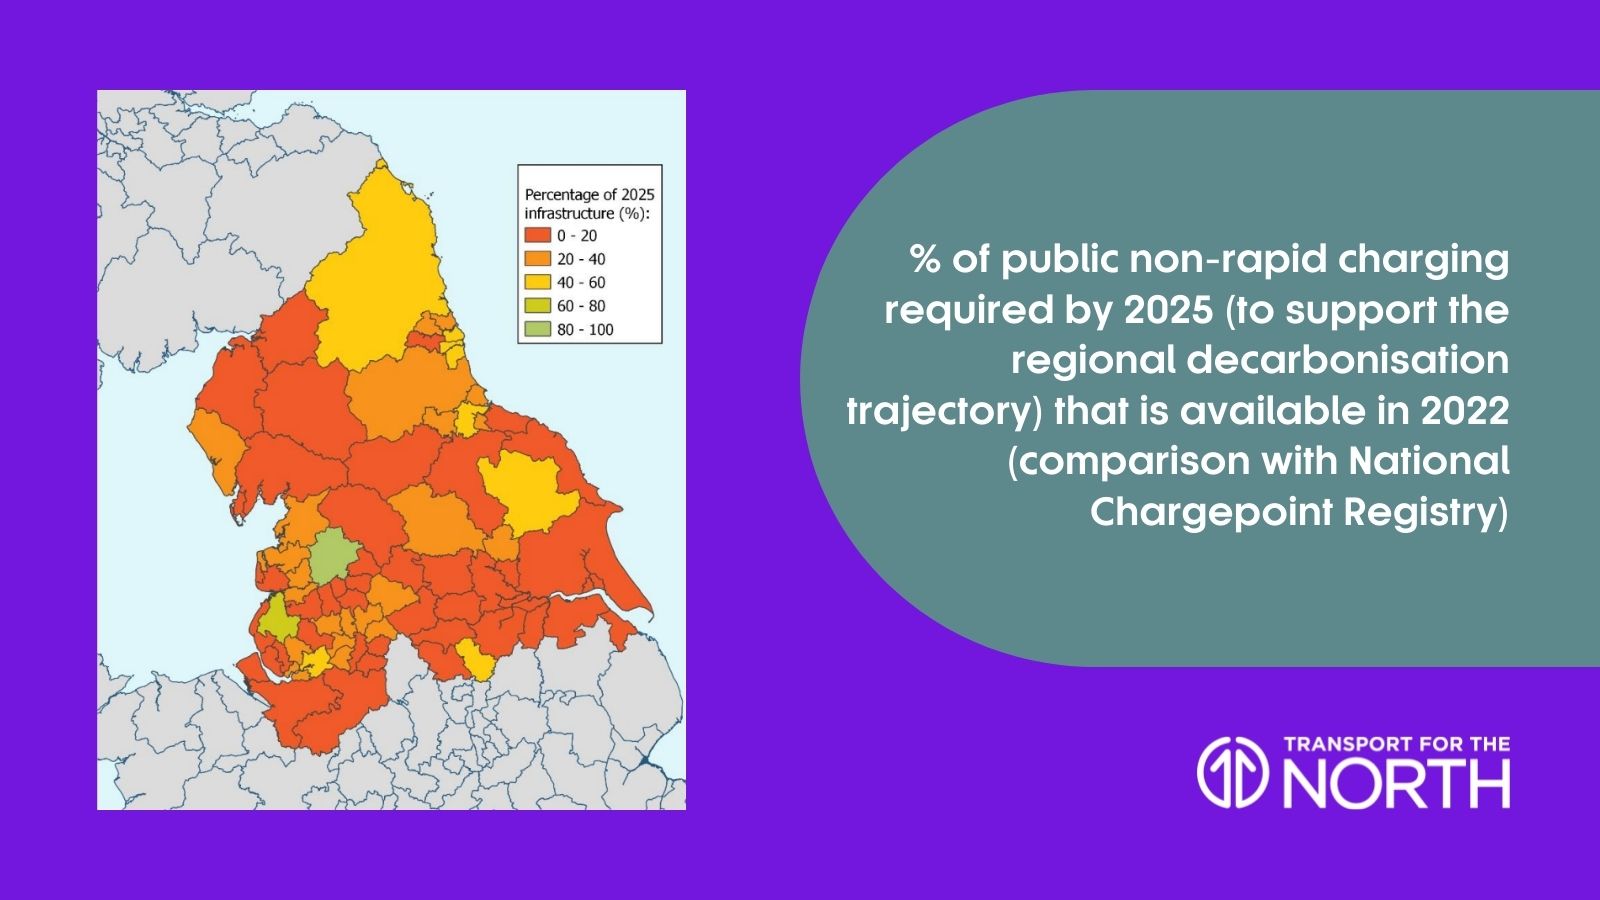 % of public non-rapid charging required by 2025 (to support the regional decarbonisation trajectory) that is available in 2022 (comparison with National Chargepoint Registry)